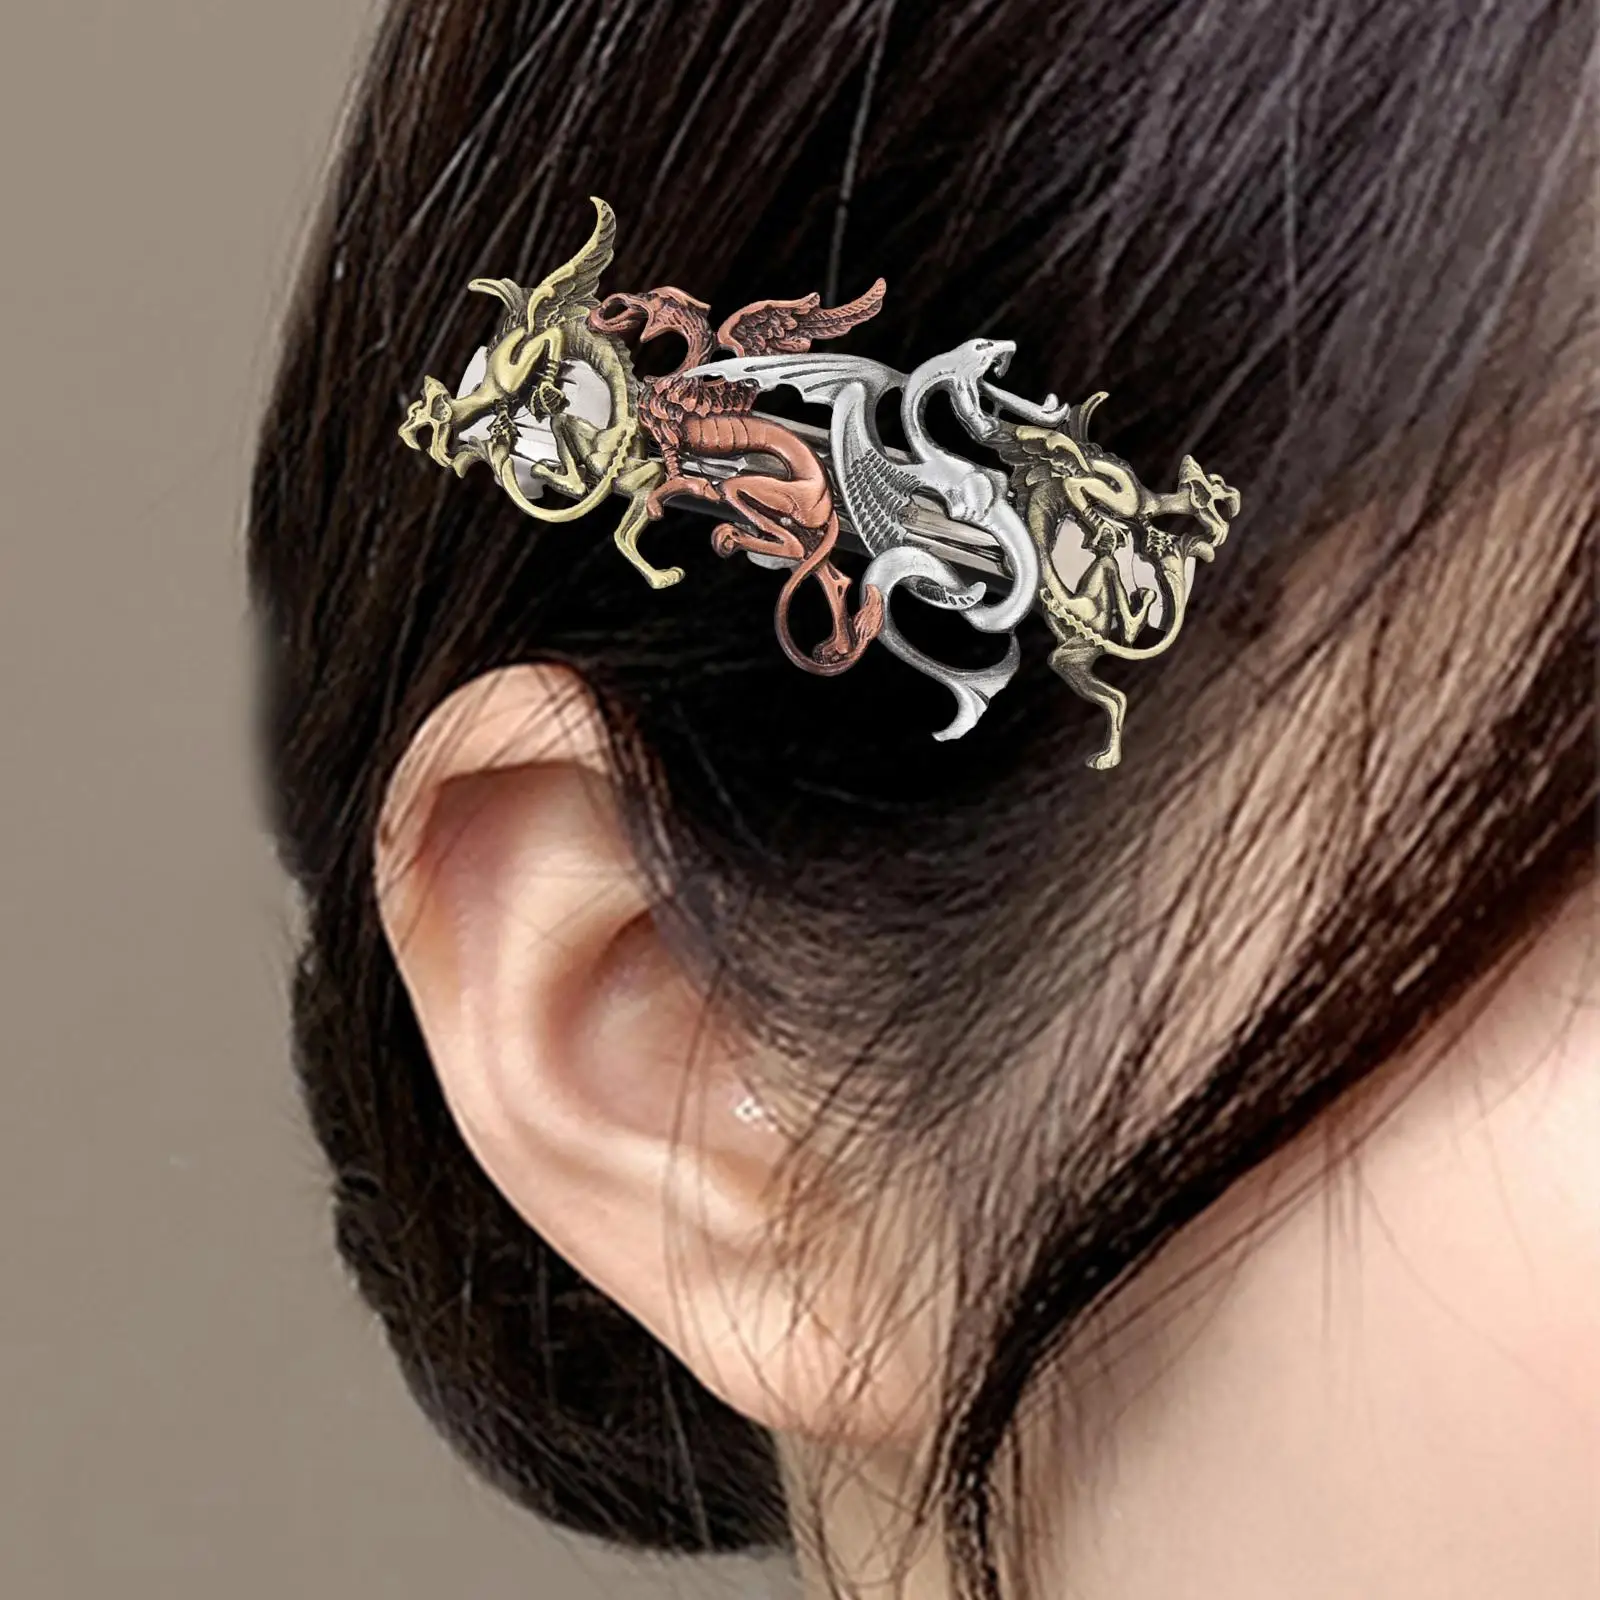 Retro Steampunk Hair Clip Hair Accessory Styling Tool Headwear Hair Pin Decorative for Makeup Wedding Daily Party Women